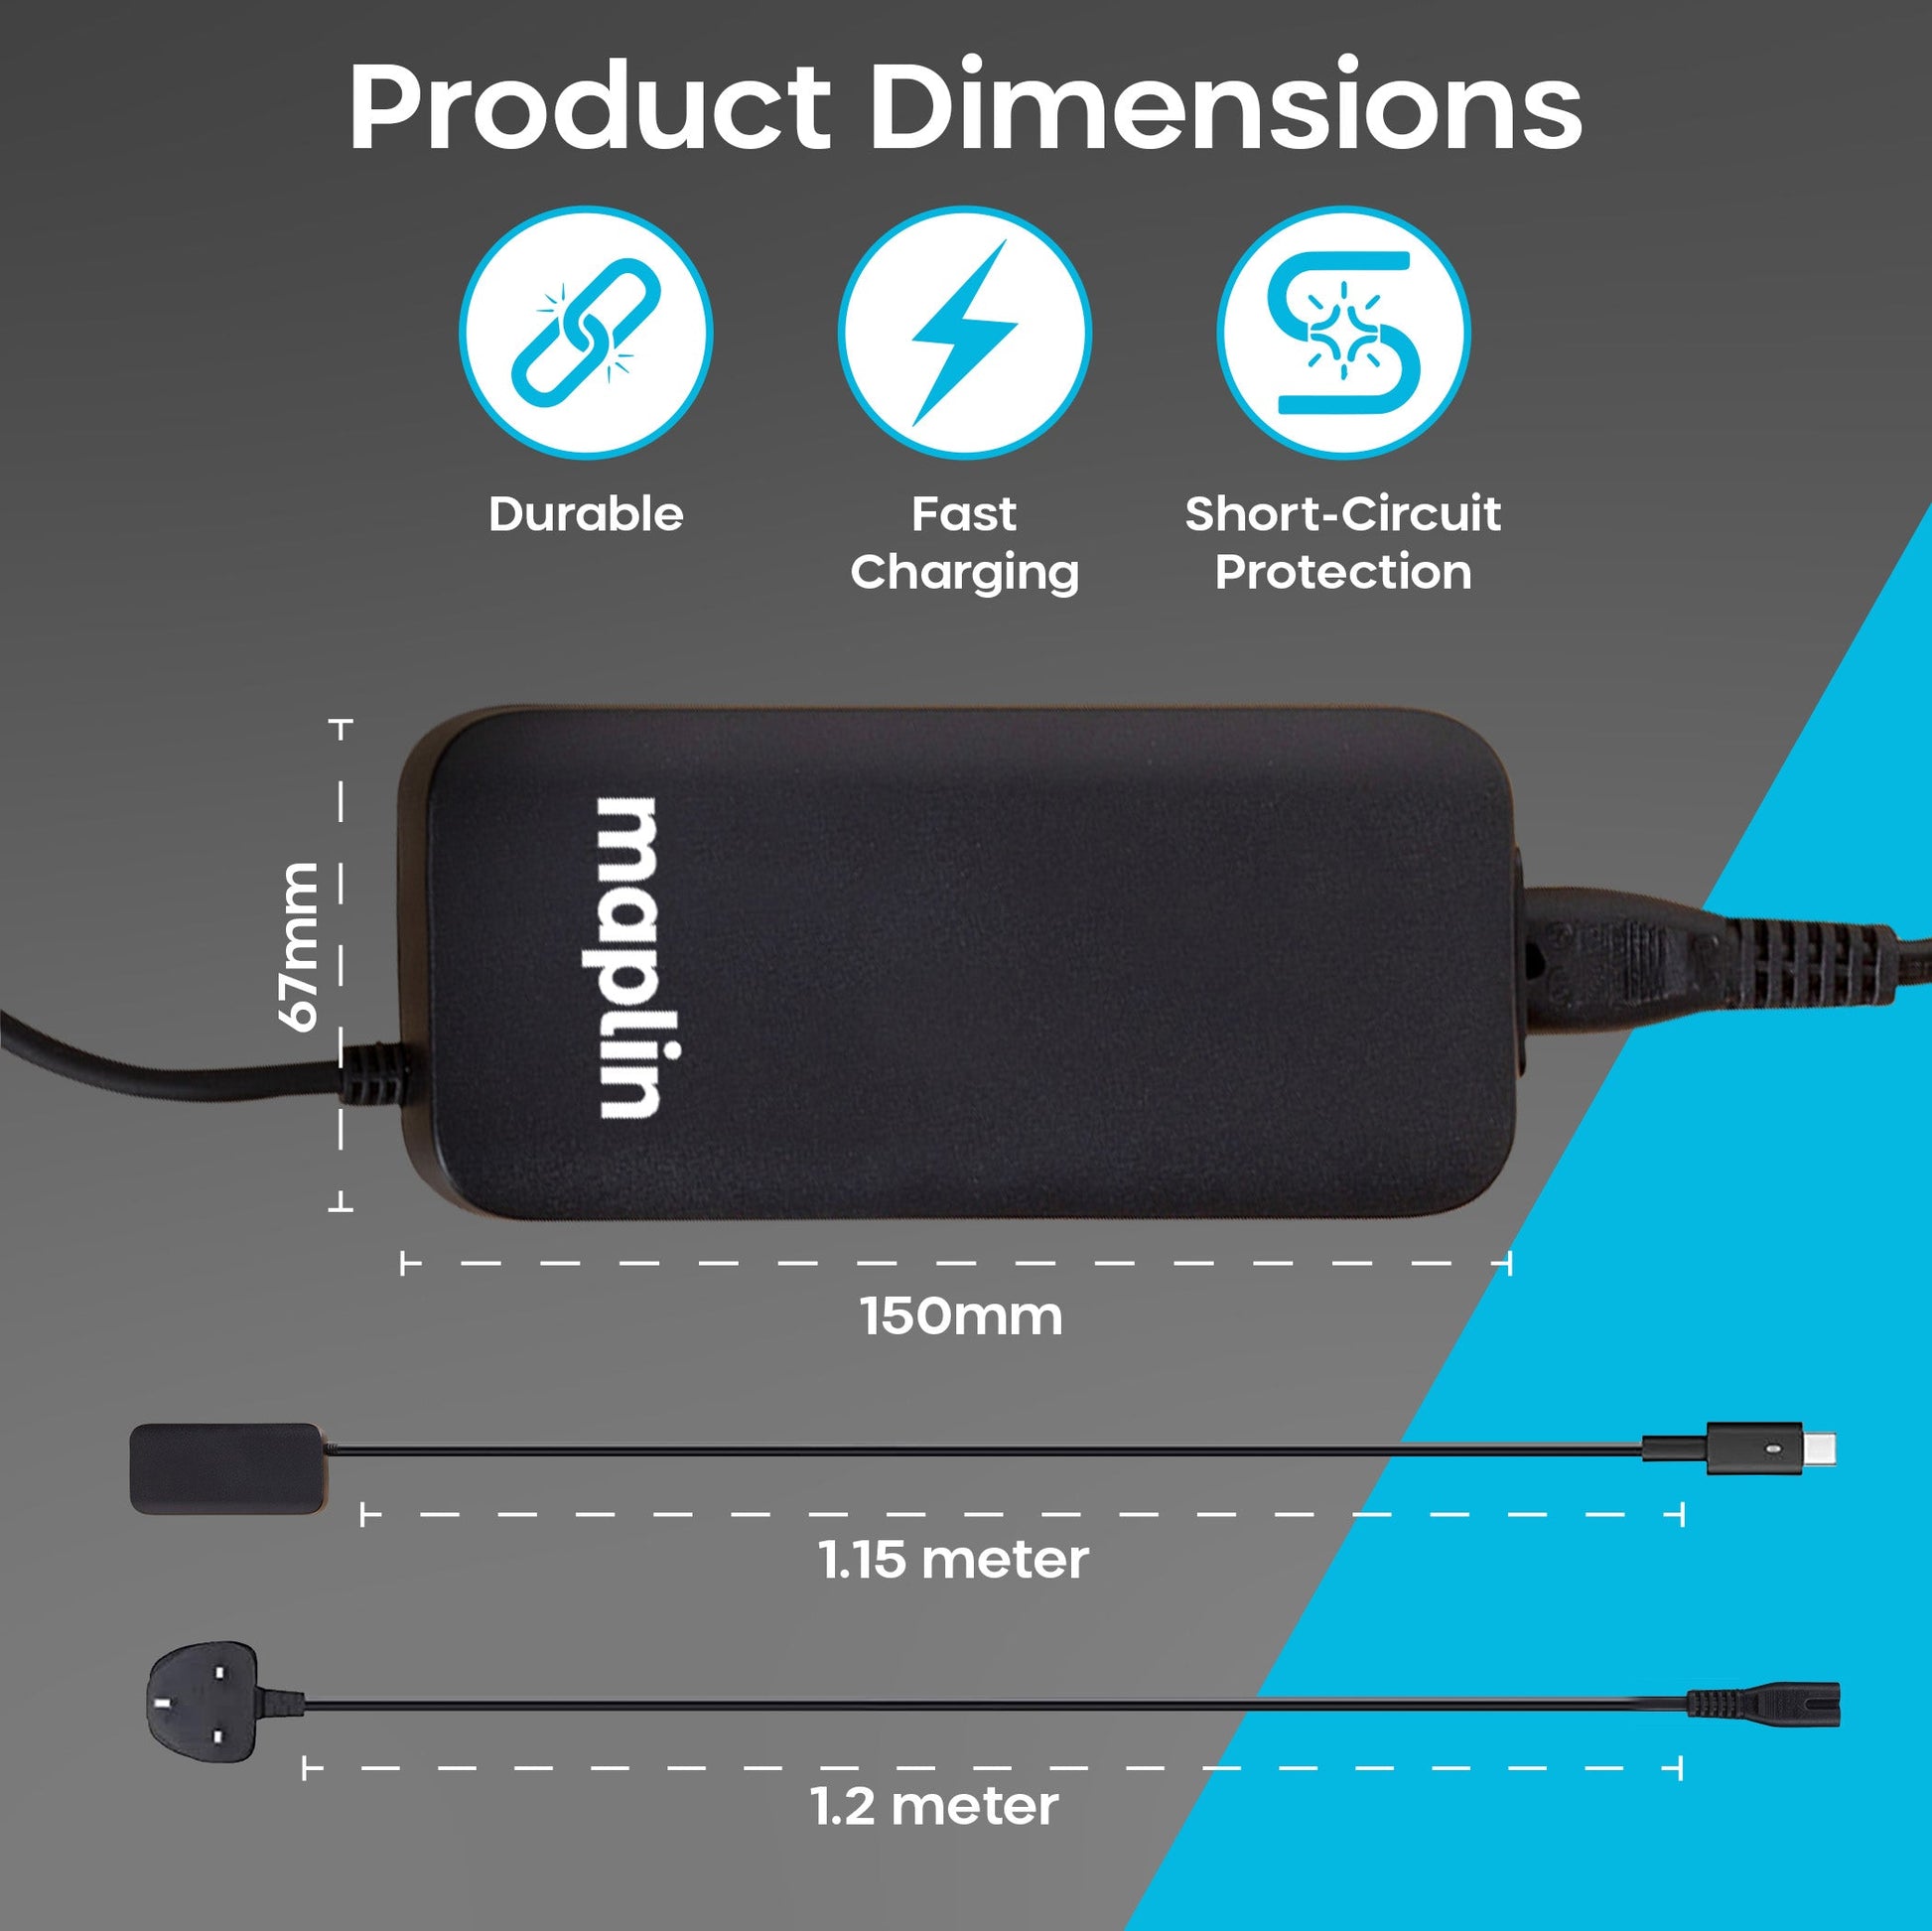 Maplin 112W USB-C Laptop Charger Power Supply with 1x USB-A 2.4A PD Port - maplin.co.uk